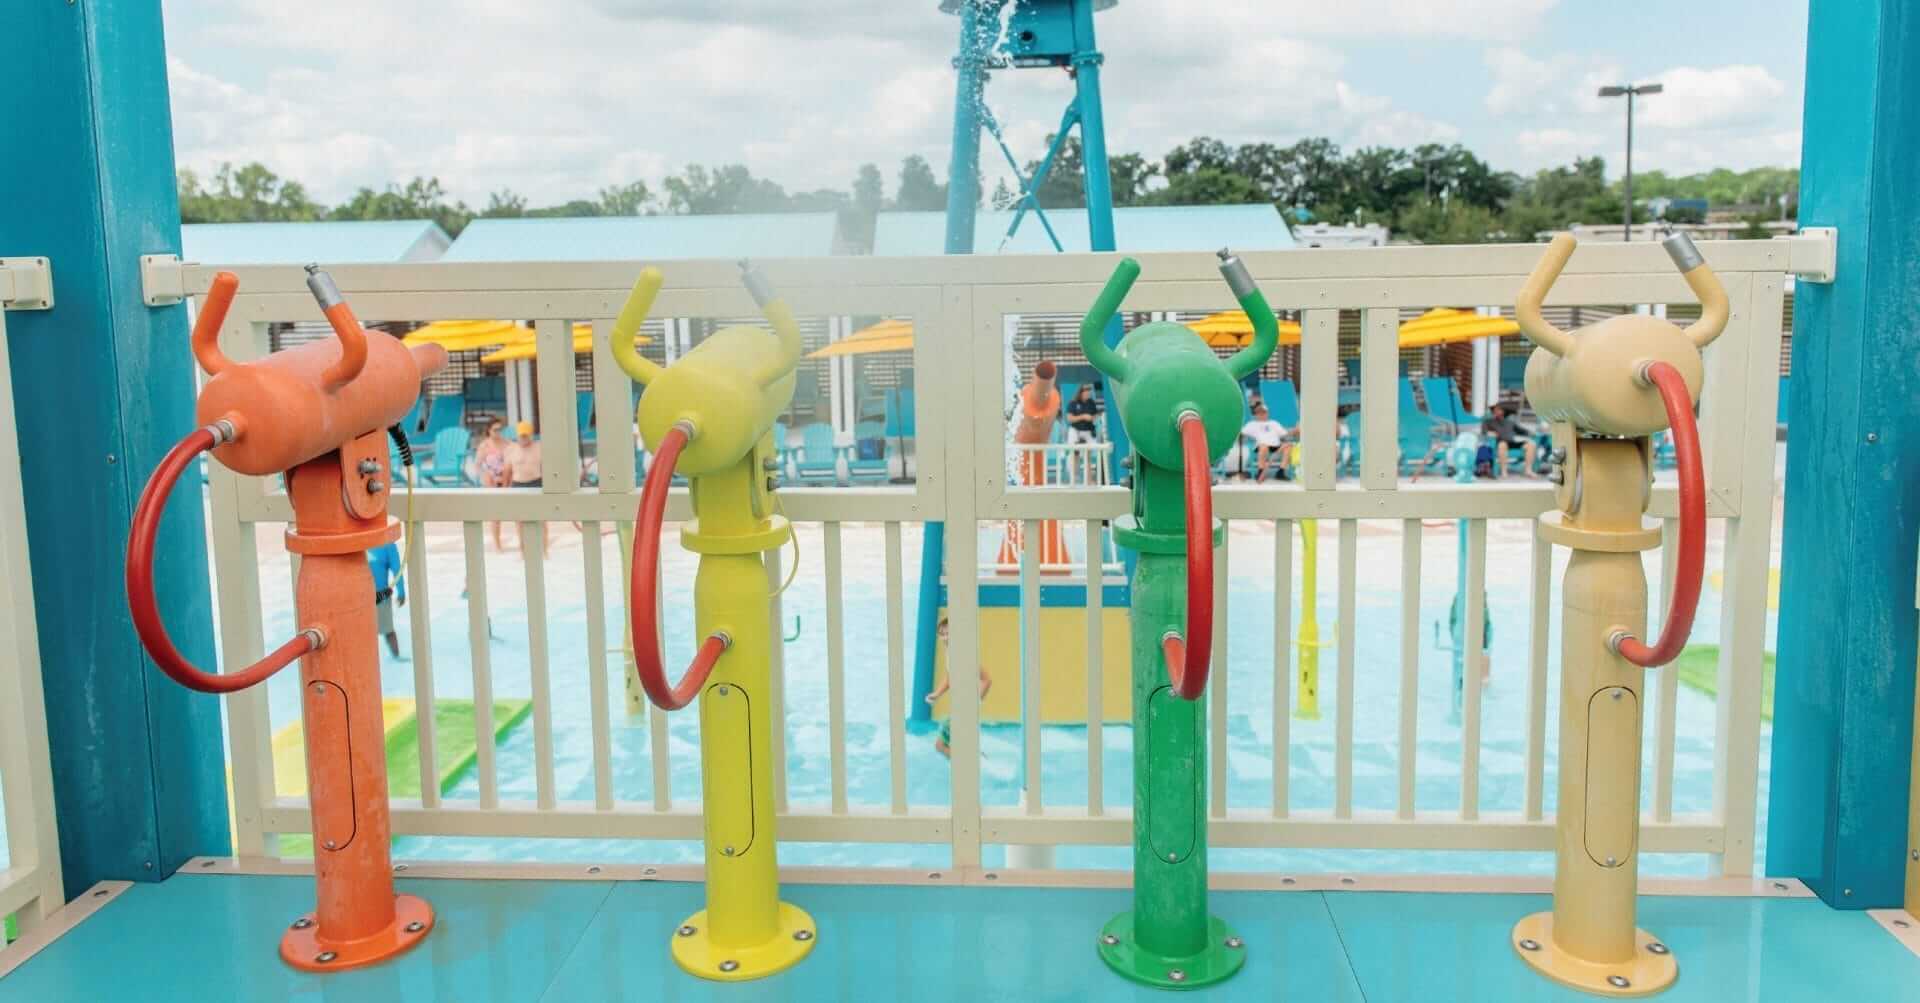 Four Rusher water gun features shown at the waterpark at Camp Margaritaville all in a row in a multi-color pattern.